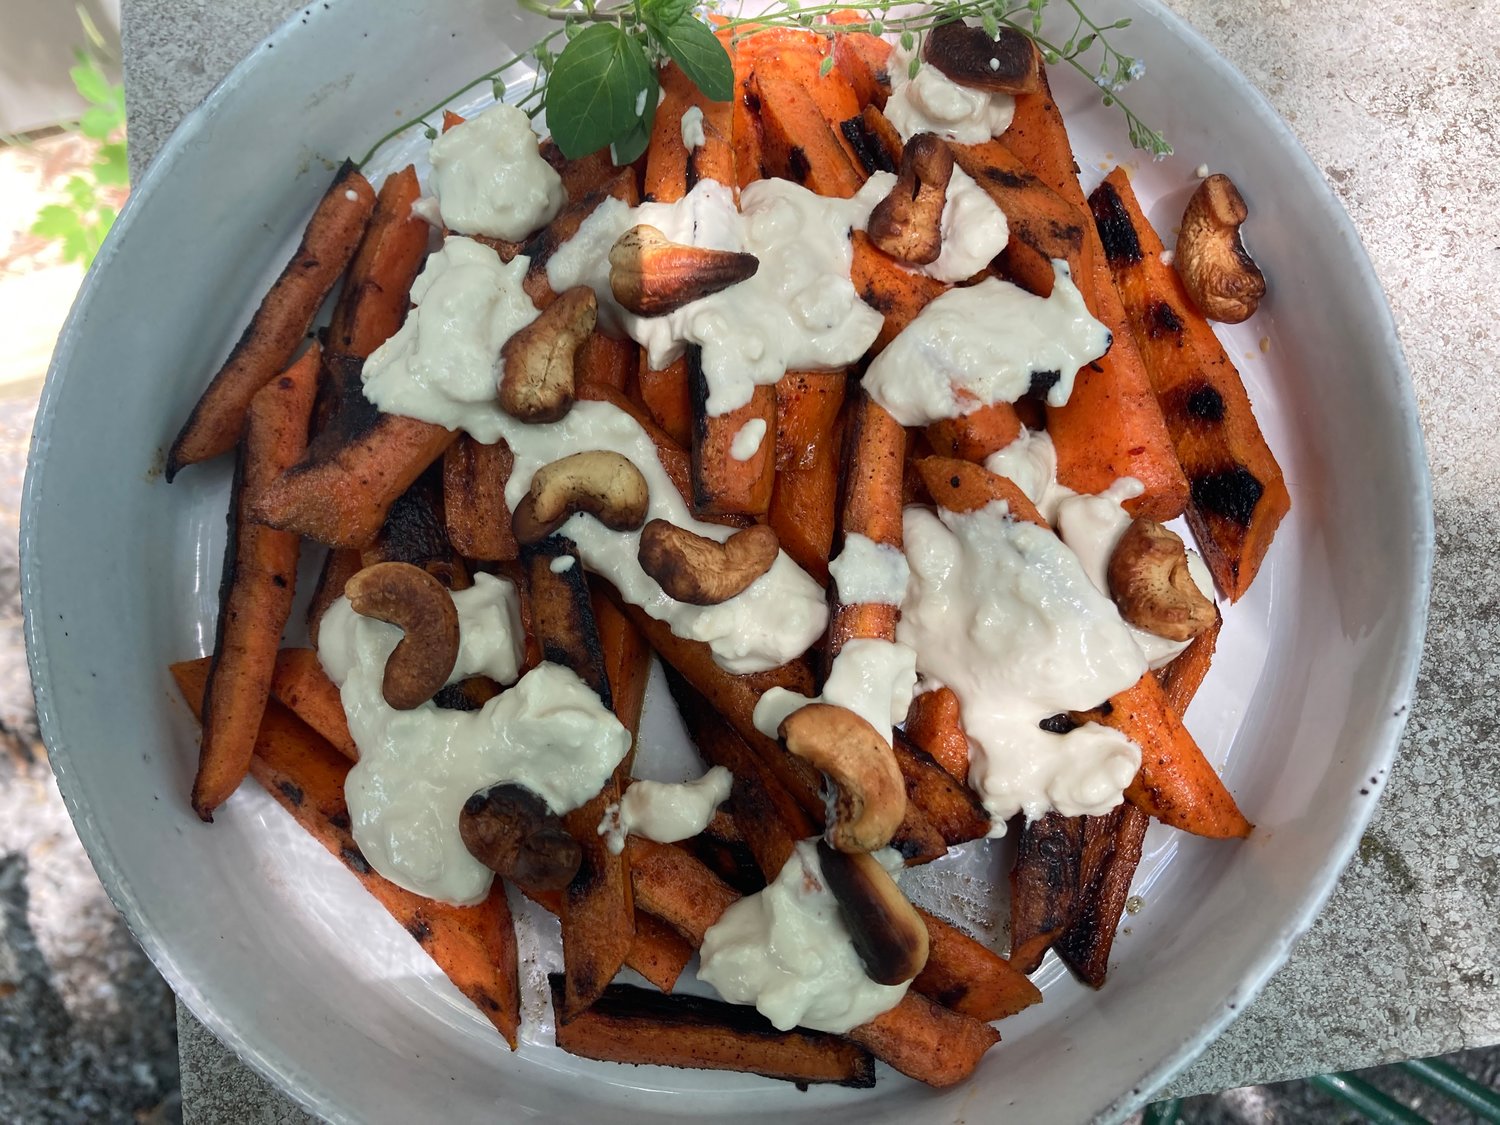 These mildly-grilled carrots are drizzled with cashew mayonnaise instead of conventional mayo.